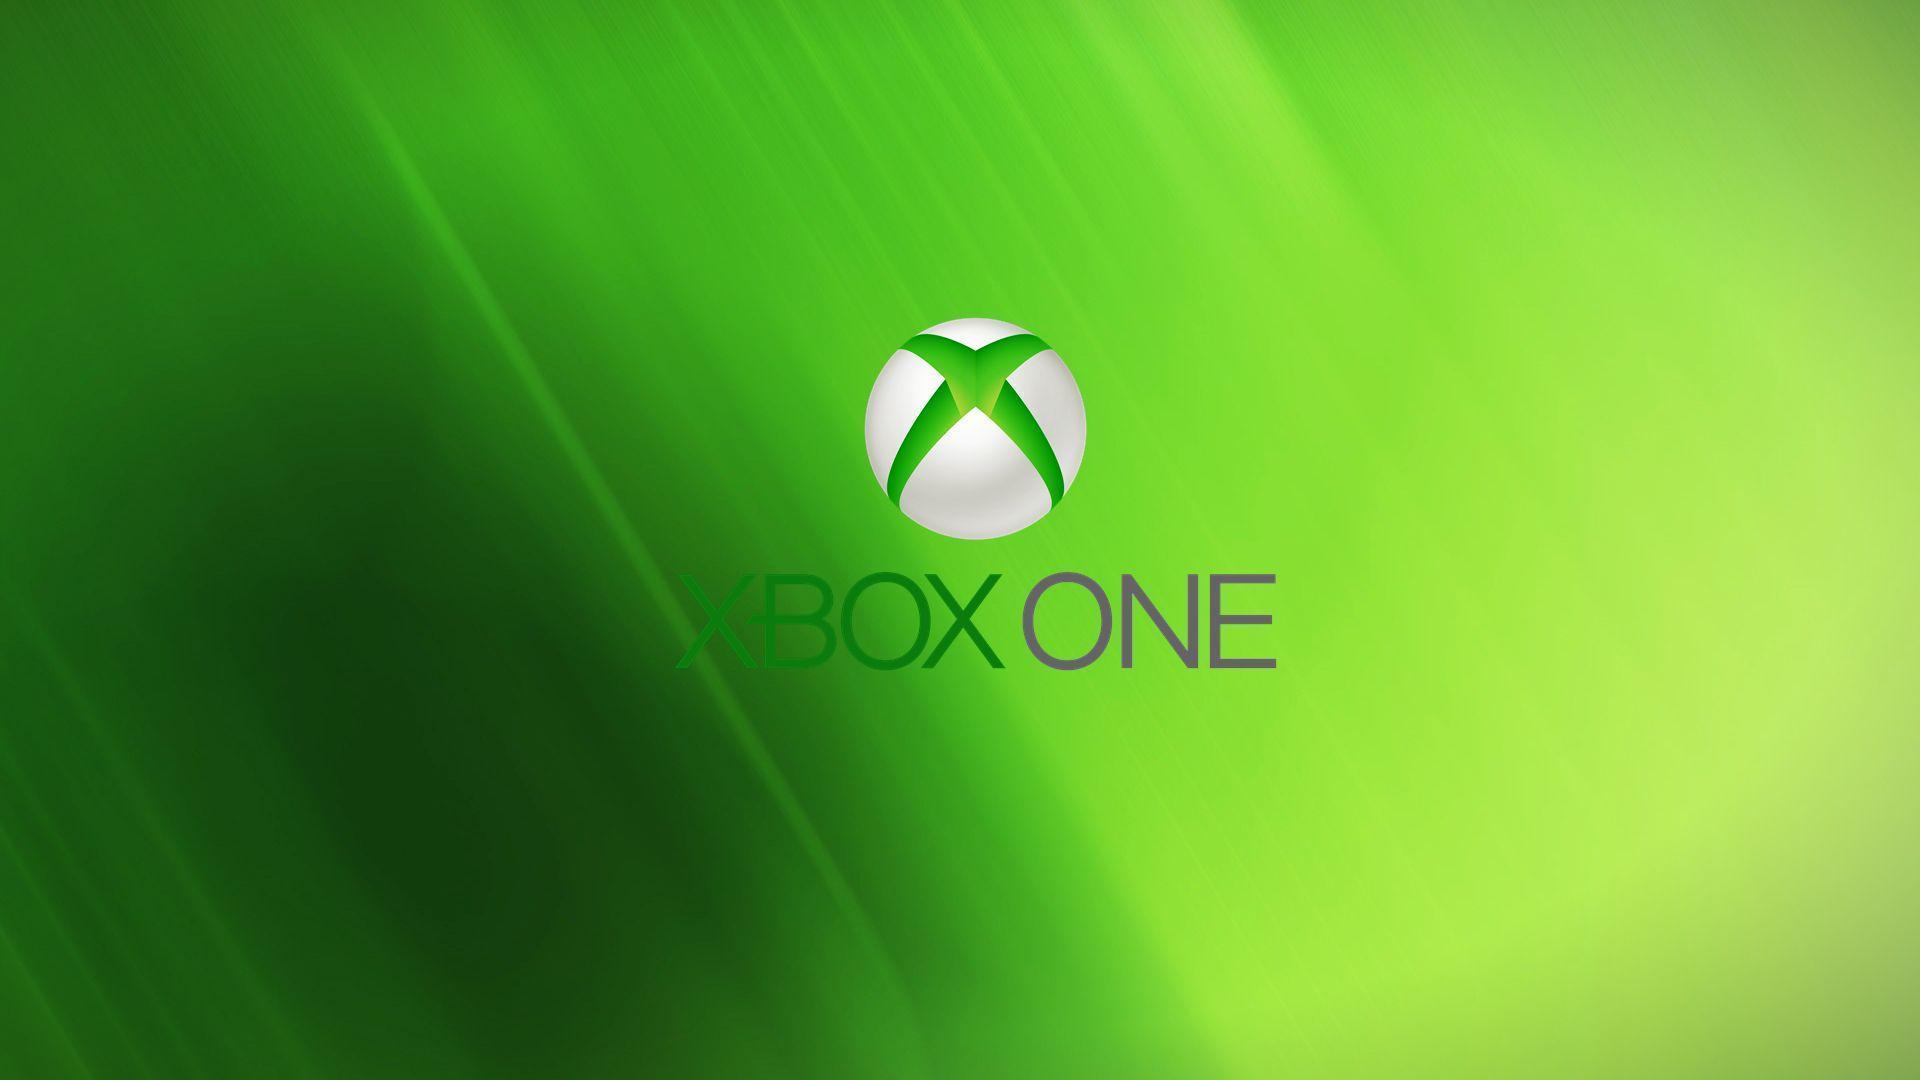 Xbox One Game Wallpaper